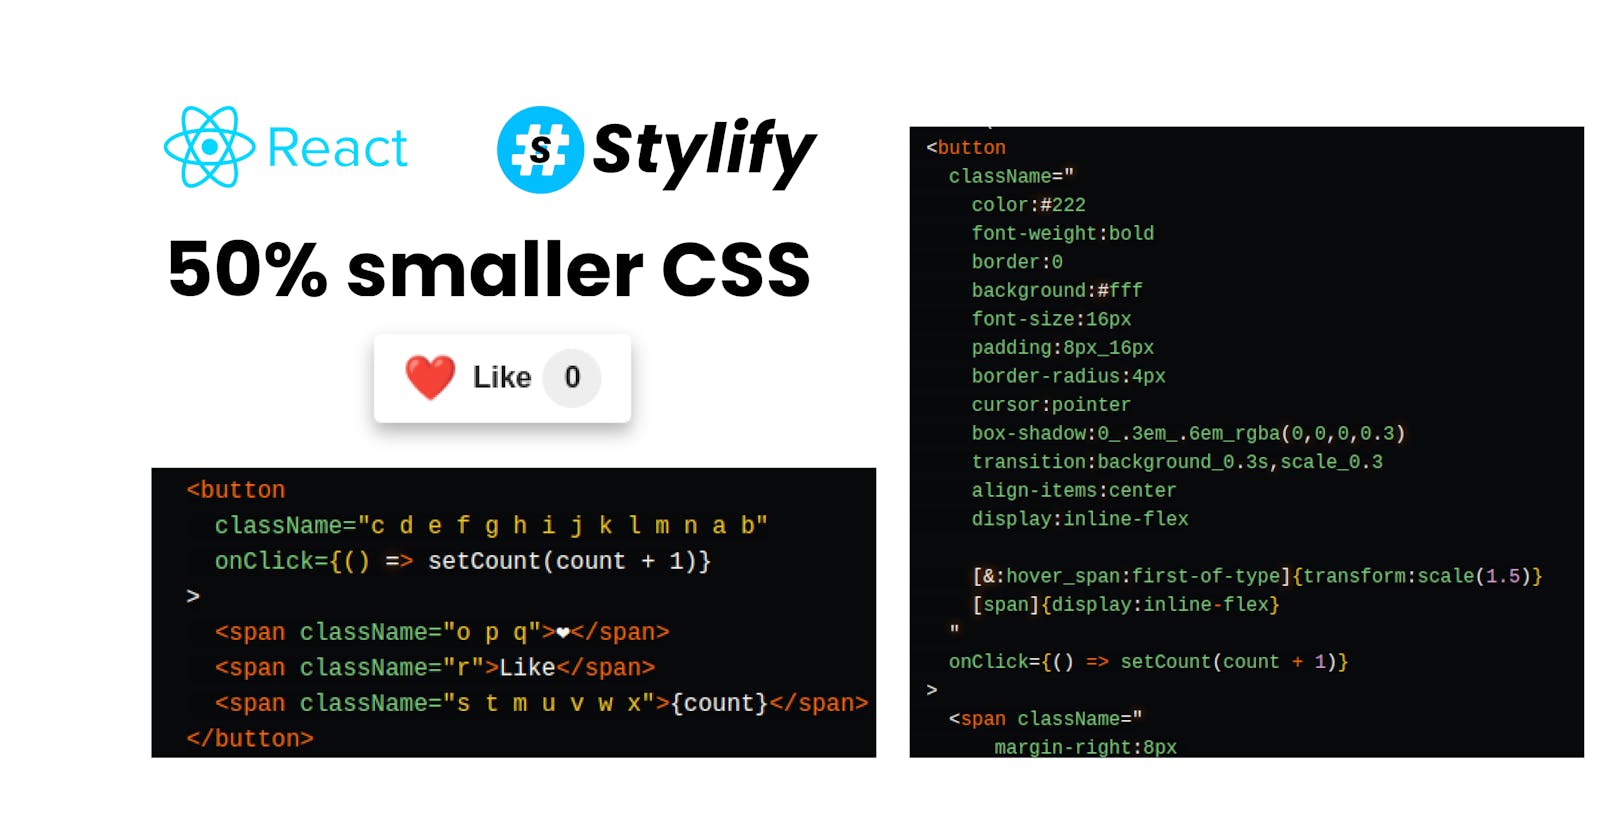 Simple React like button with Stylify CSS. From Utilities to Components, mangled selectors, and 50% smaller production build.